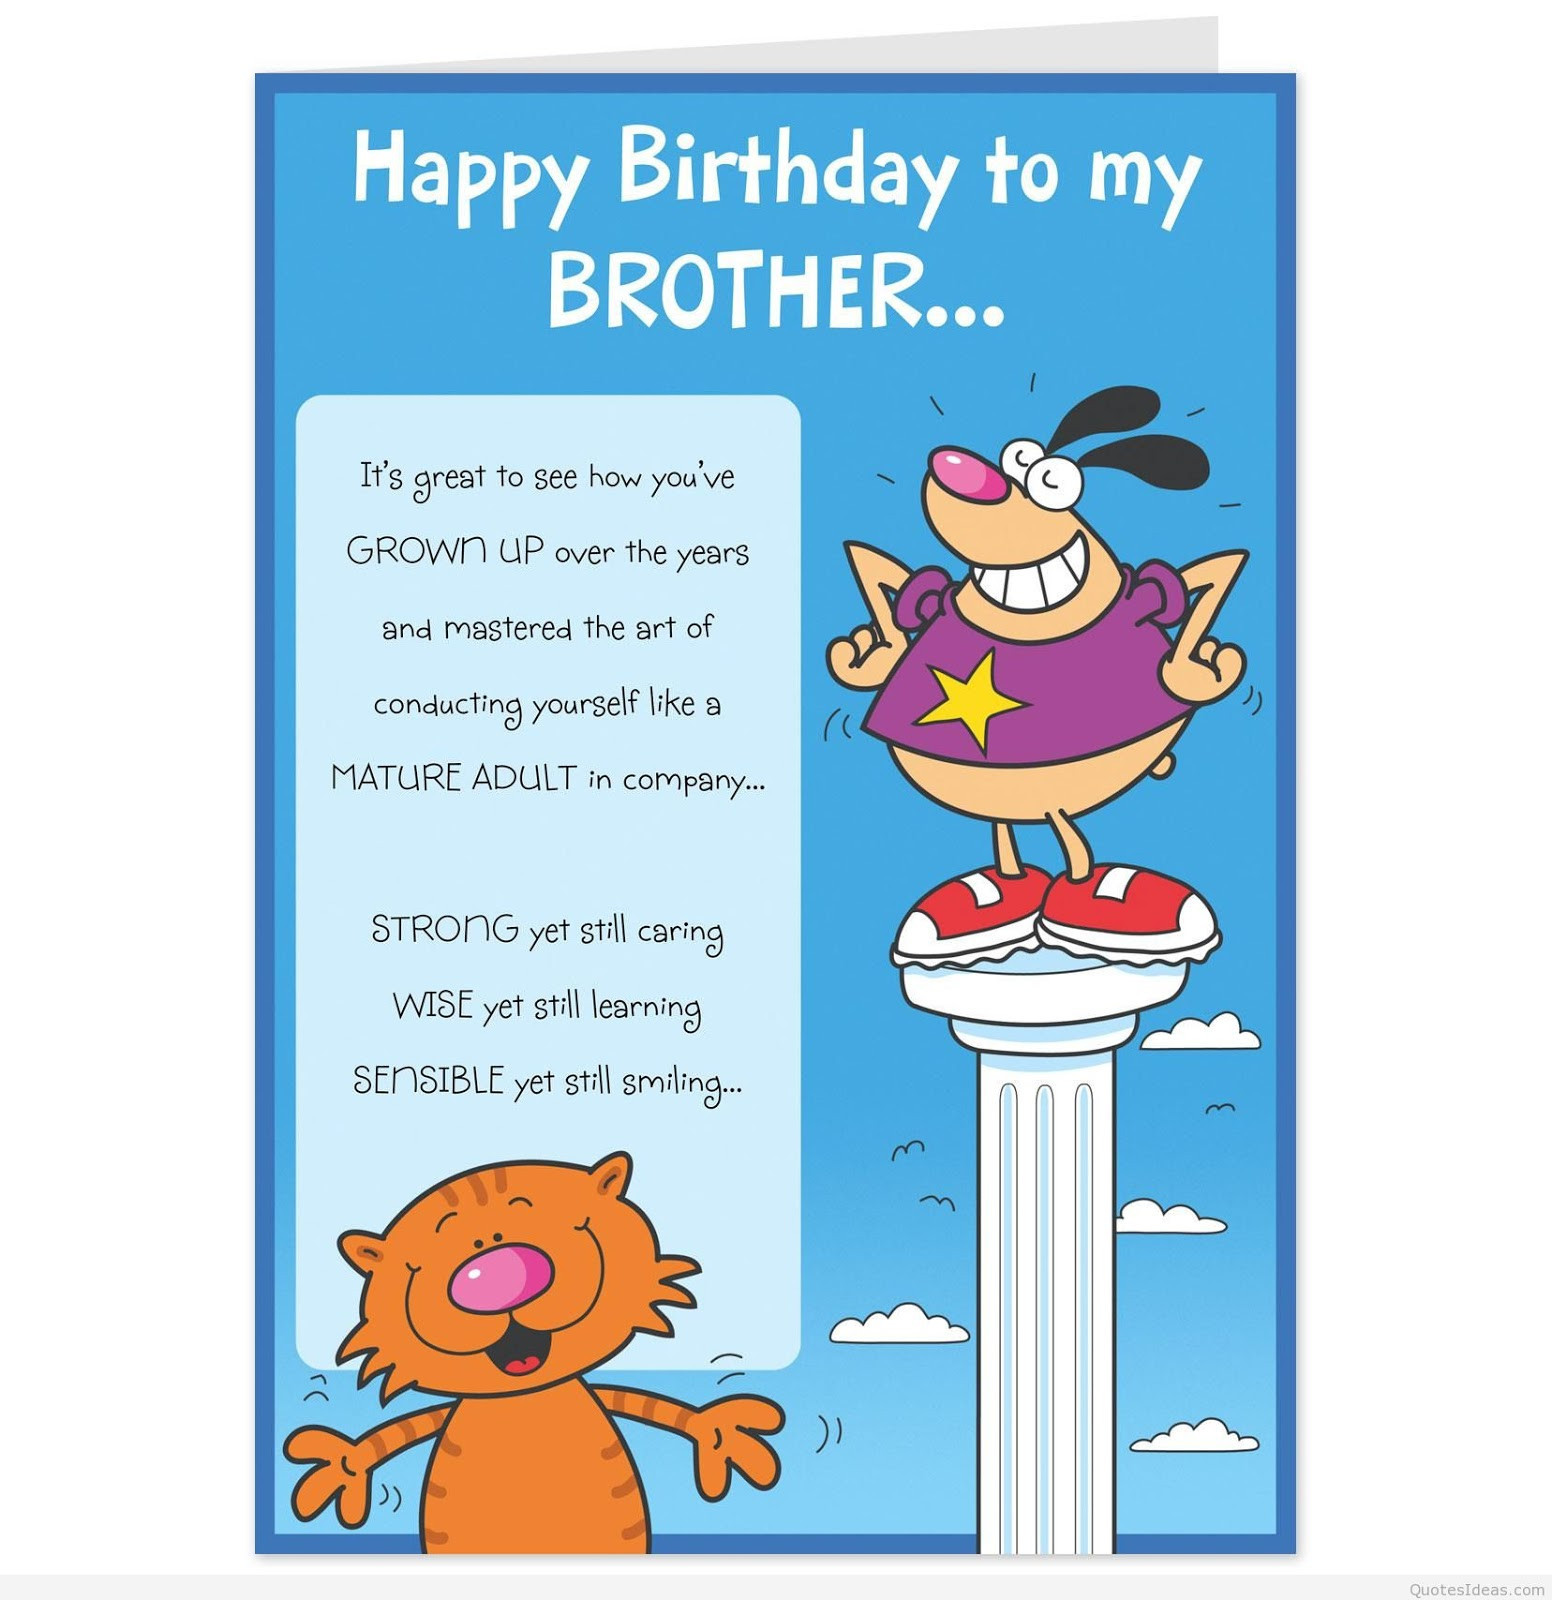 special-brother-happy-birthday-greeting-card-cards-love-kates-happy-birthday-brother-cards